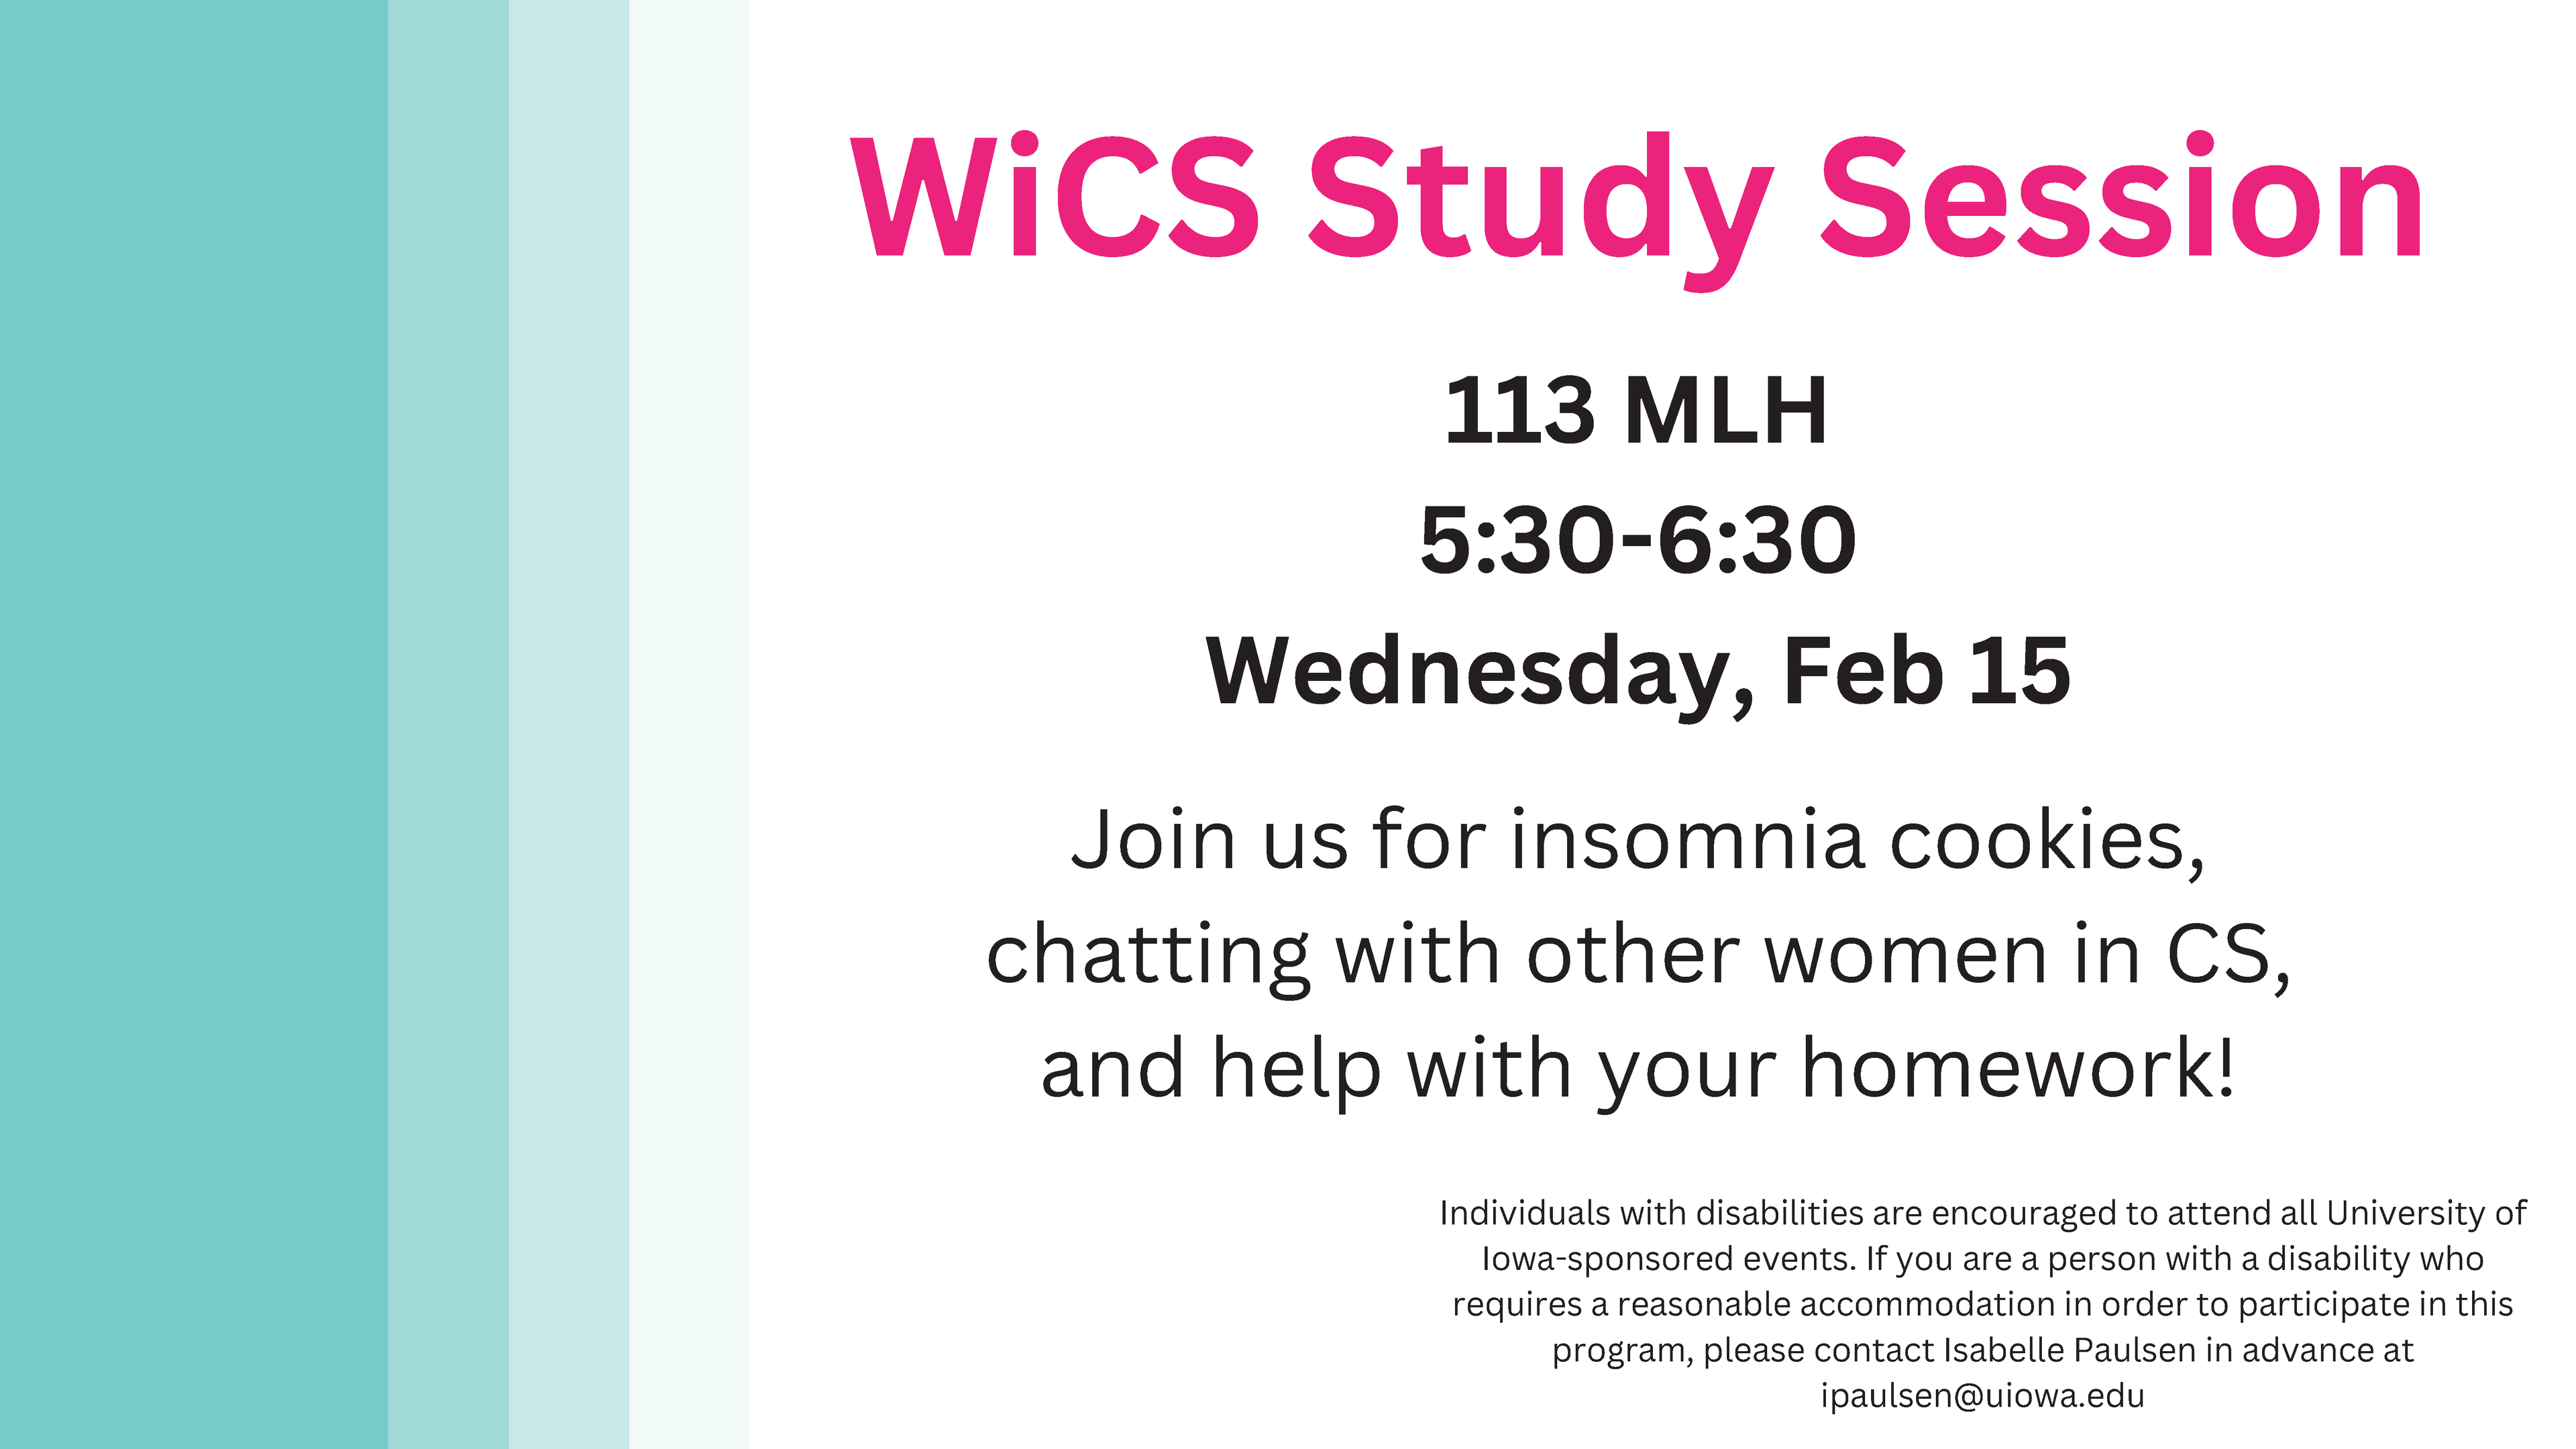 WiCS Study Session 113 MLH 5:30-6:30 Wednesday, Feb 15 Join us for insomnia cookies, chatting with other women in CS, and help with your homework! Individuals with disabilities are encouraged to attend all University of Iowa-sponsored events. If you are a person with a disability who requires a reasonable accommodation in order to participate in this program, please contact Isabelle Paulsen in advance at ipaulsen@uiowa.edu